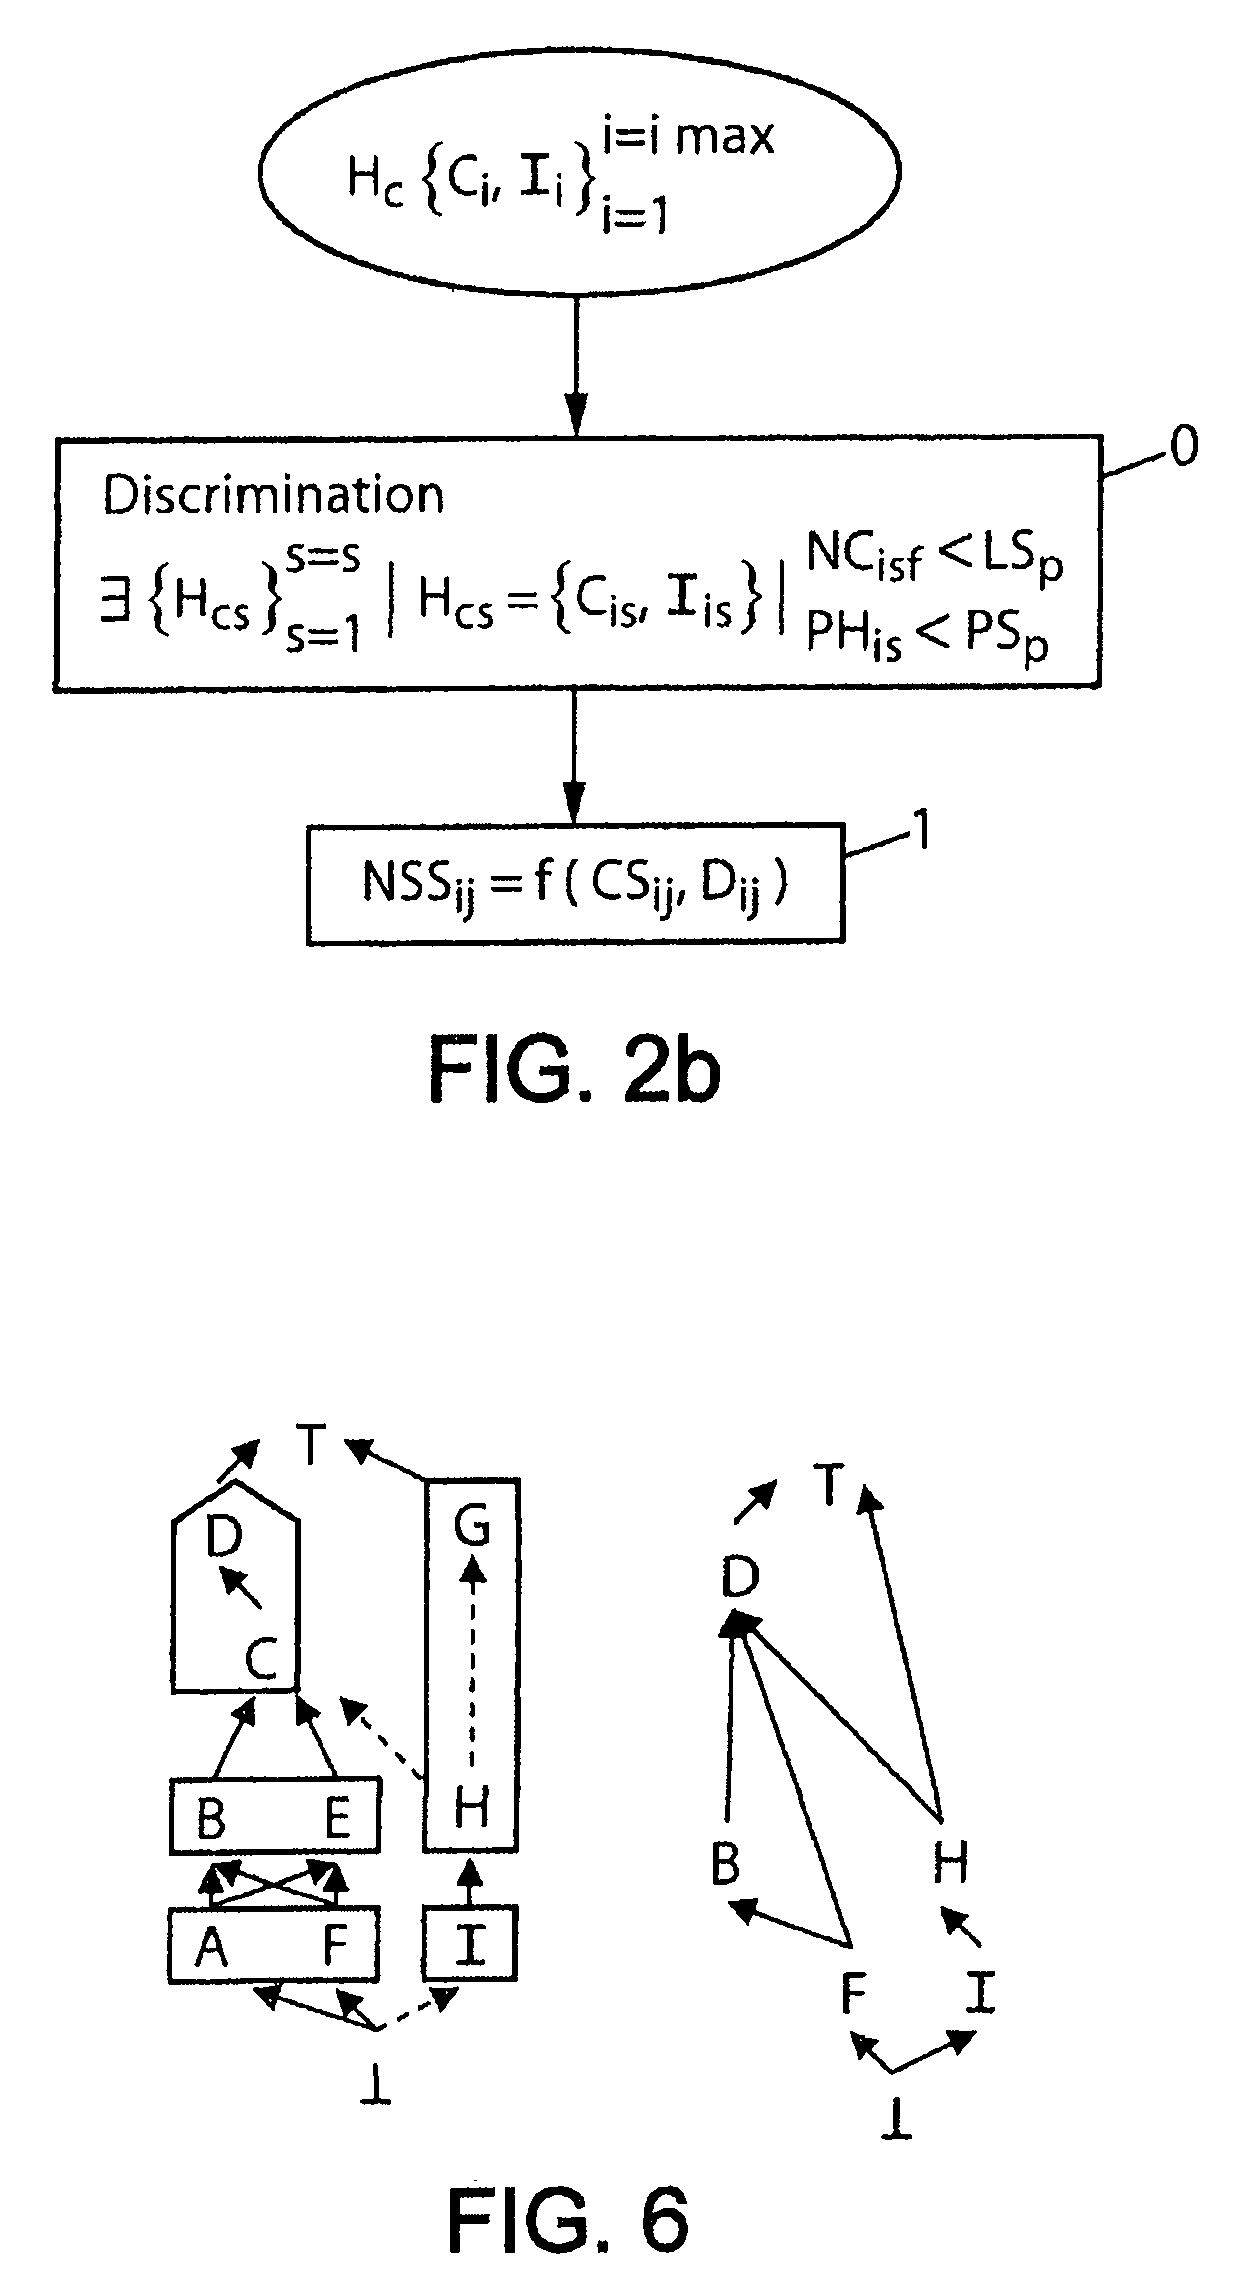 Method and device for encoding a score of semantic and spatial similarity between concepts of an ontology stored in hierarchically numbered trellis form